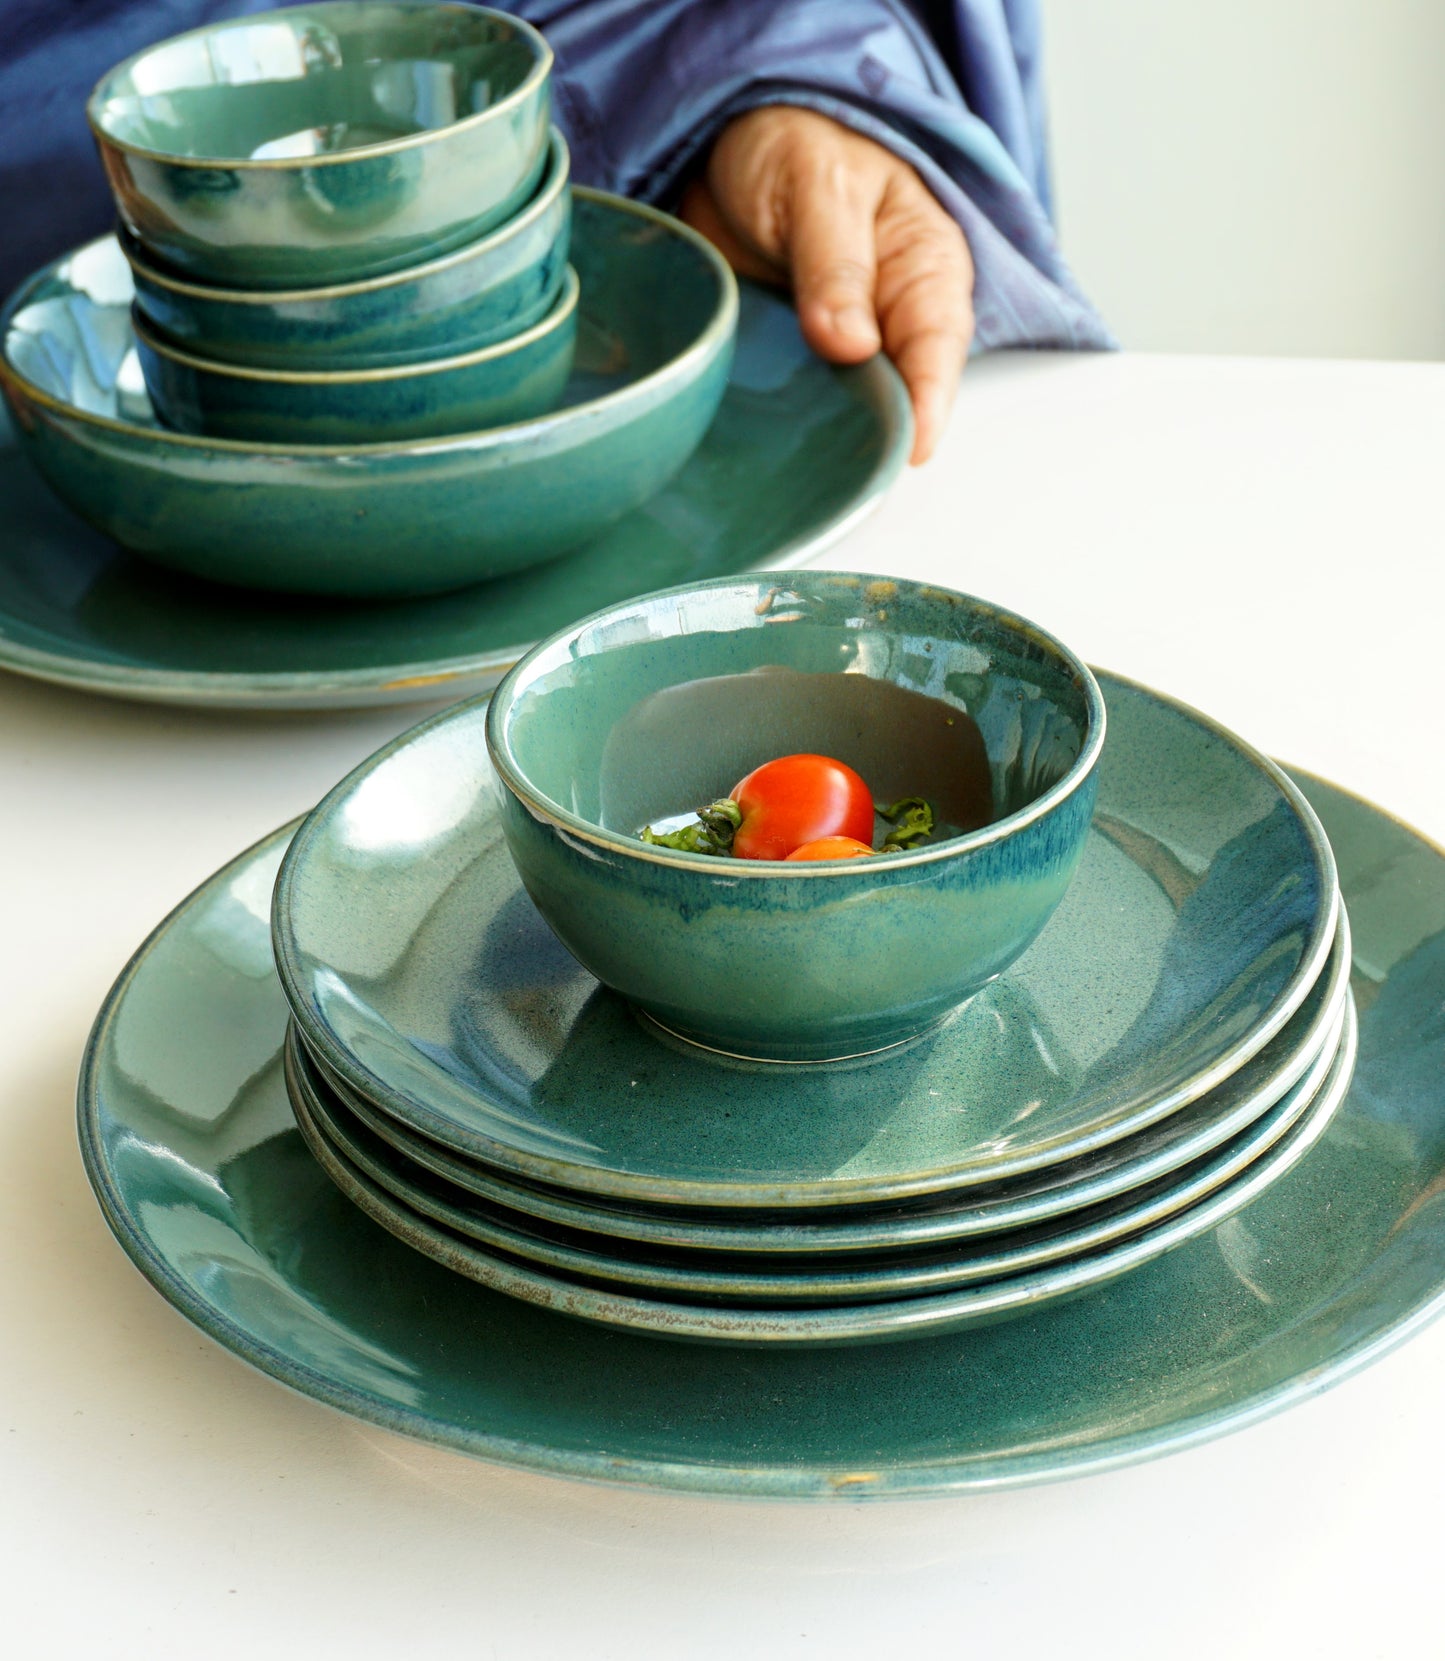 Hues of Olive Dinner Set (7 pieces)